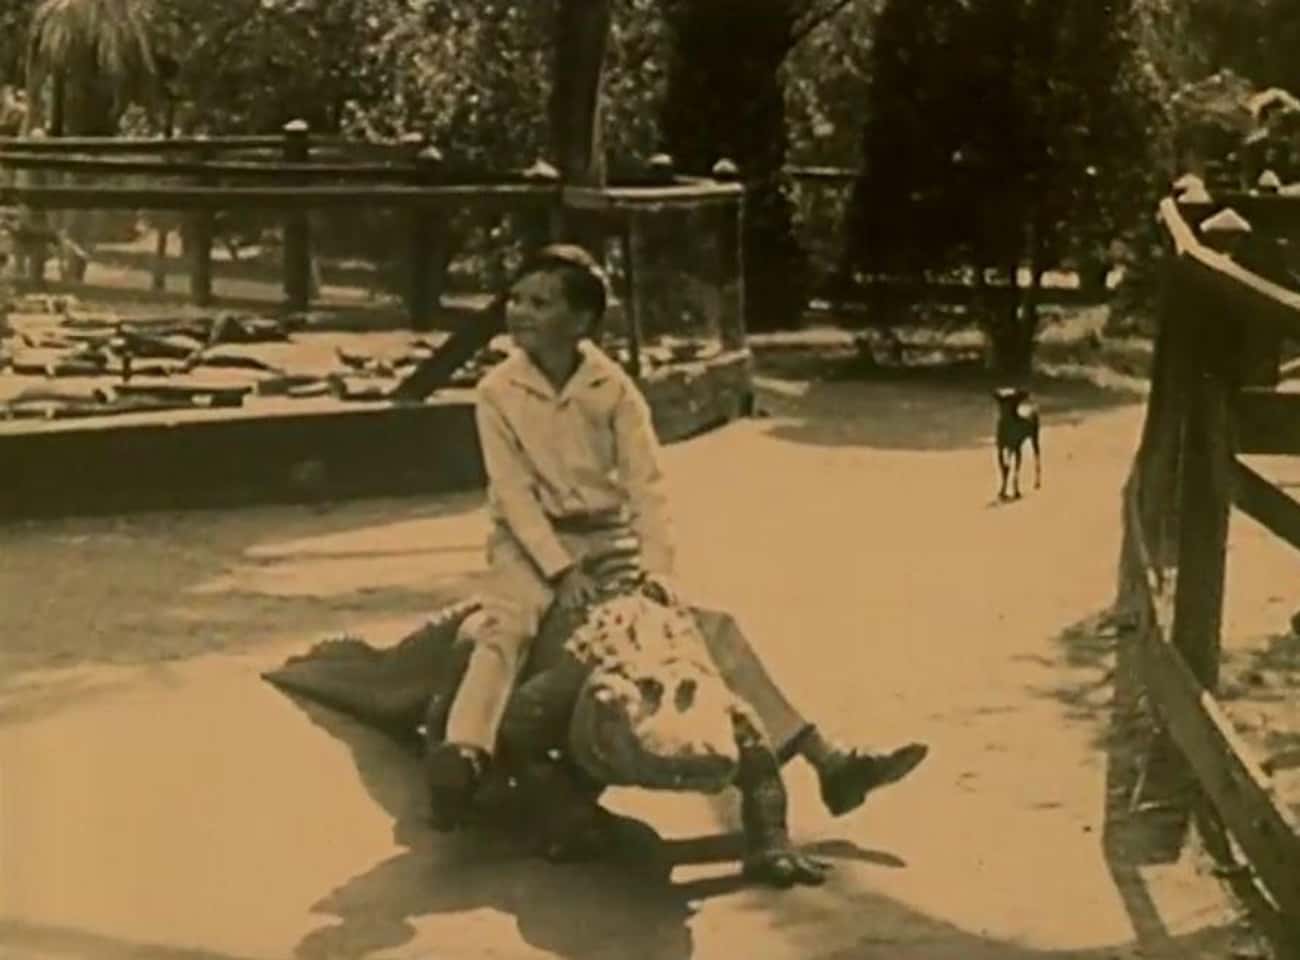 A Young Boy Takes An Alligator Ride